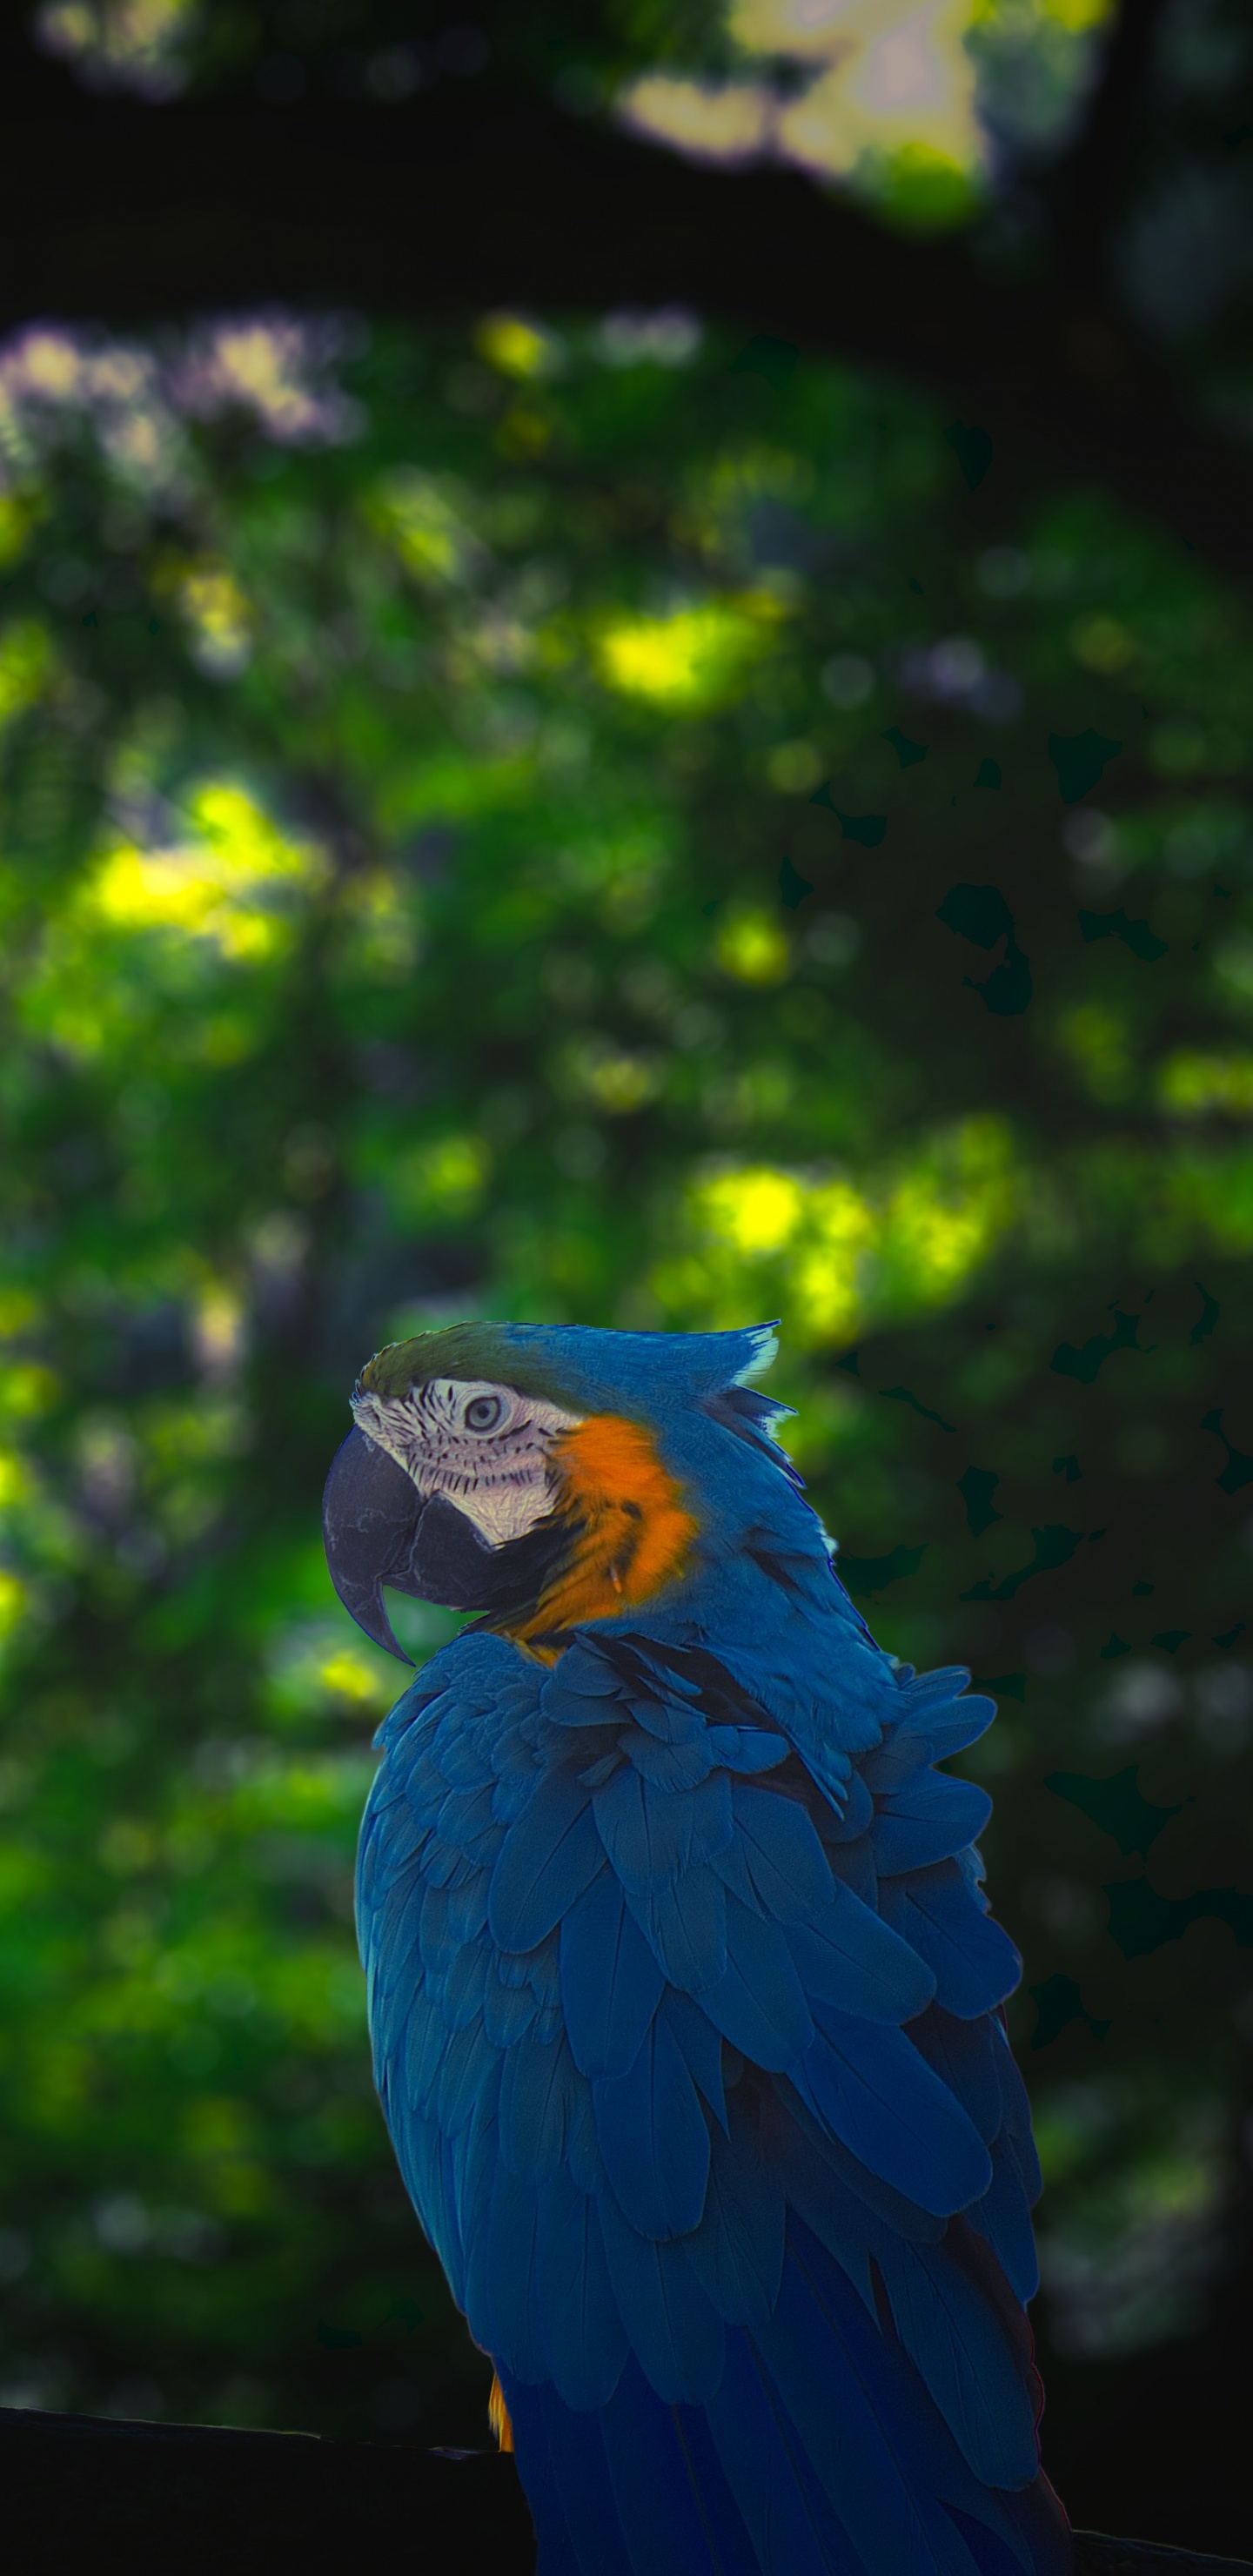 Blue and Yellow Macaw on Black Wooden Fence During Daytime. Wallpaper in 1440x2960 Resolution